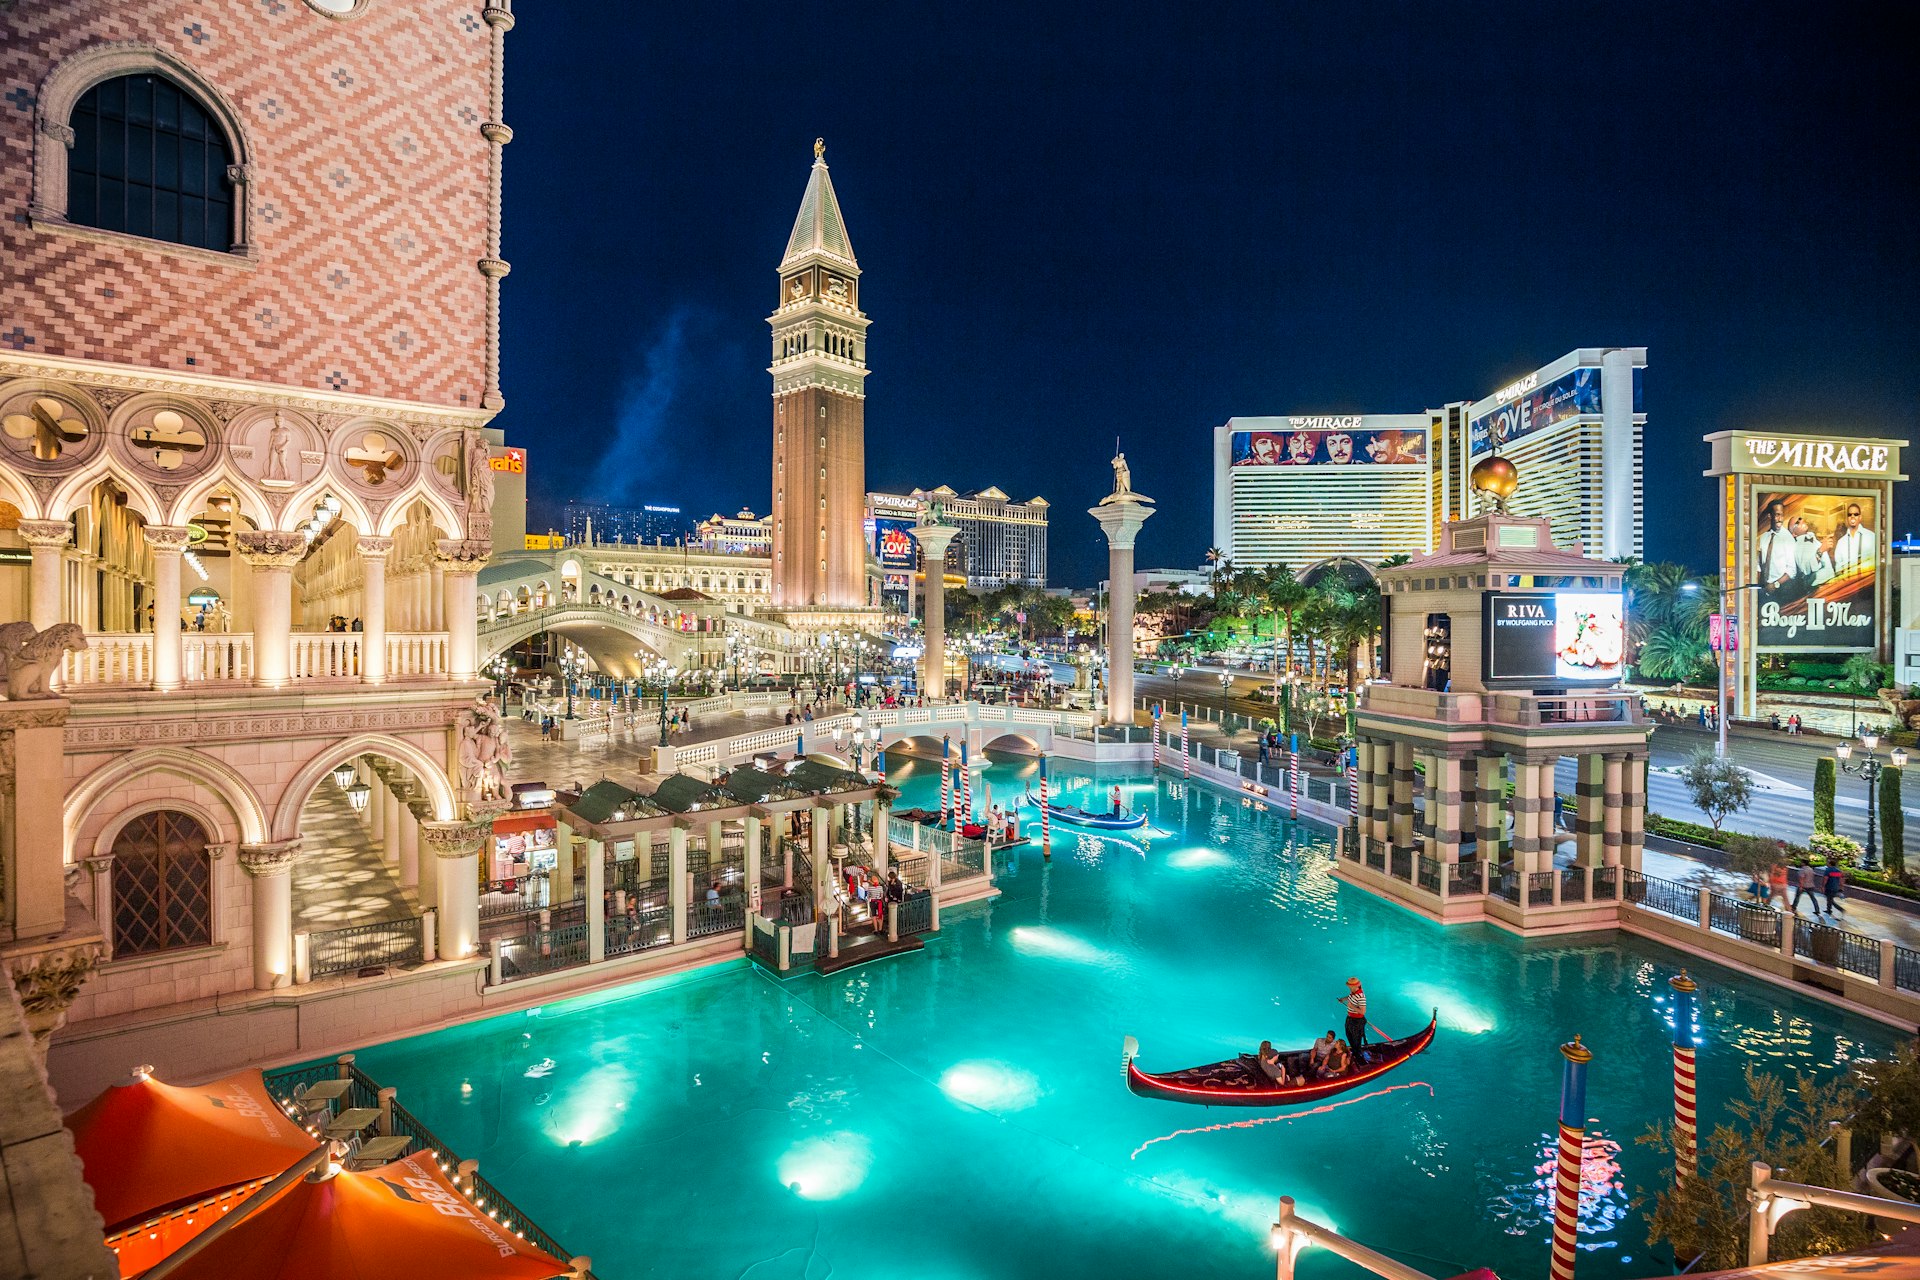 The Venetian Hotel in Las Vegas, an excellent city for redeeming points and miles for top-tier rewards